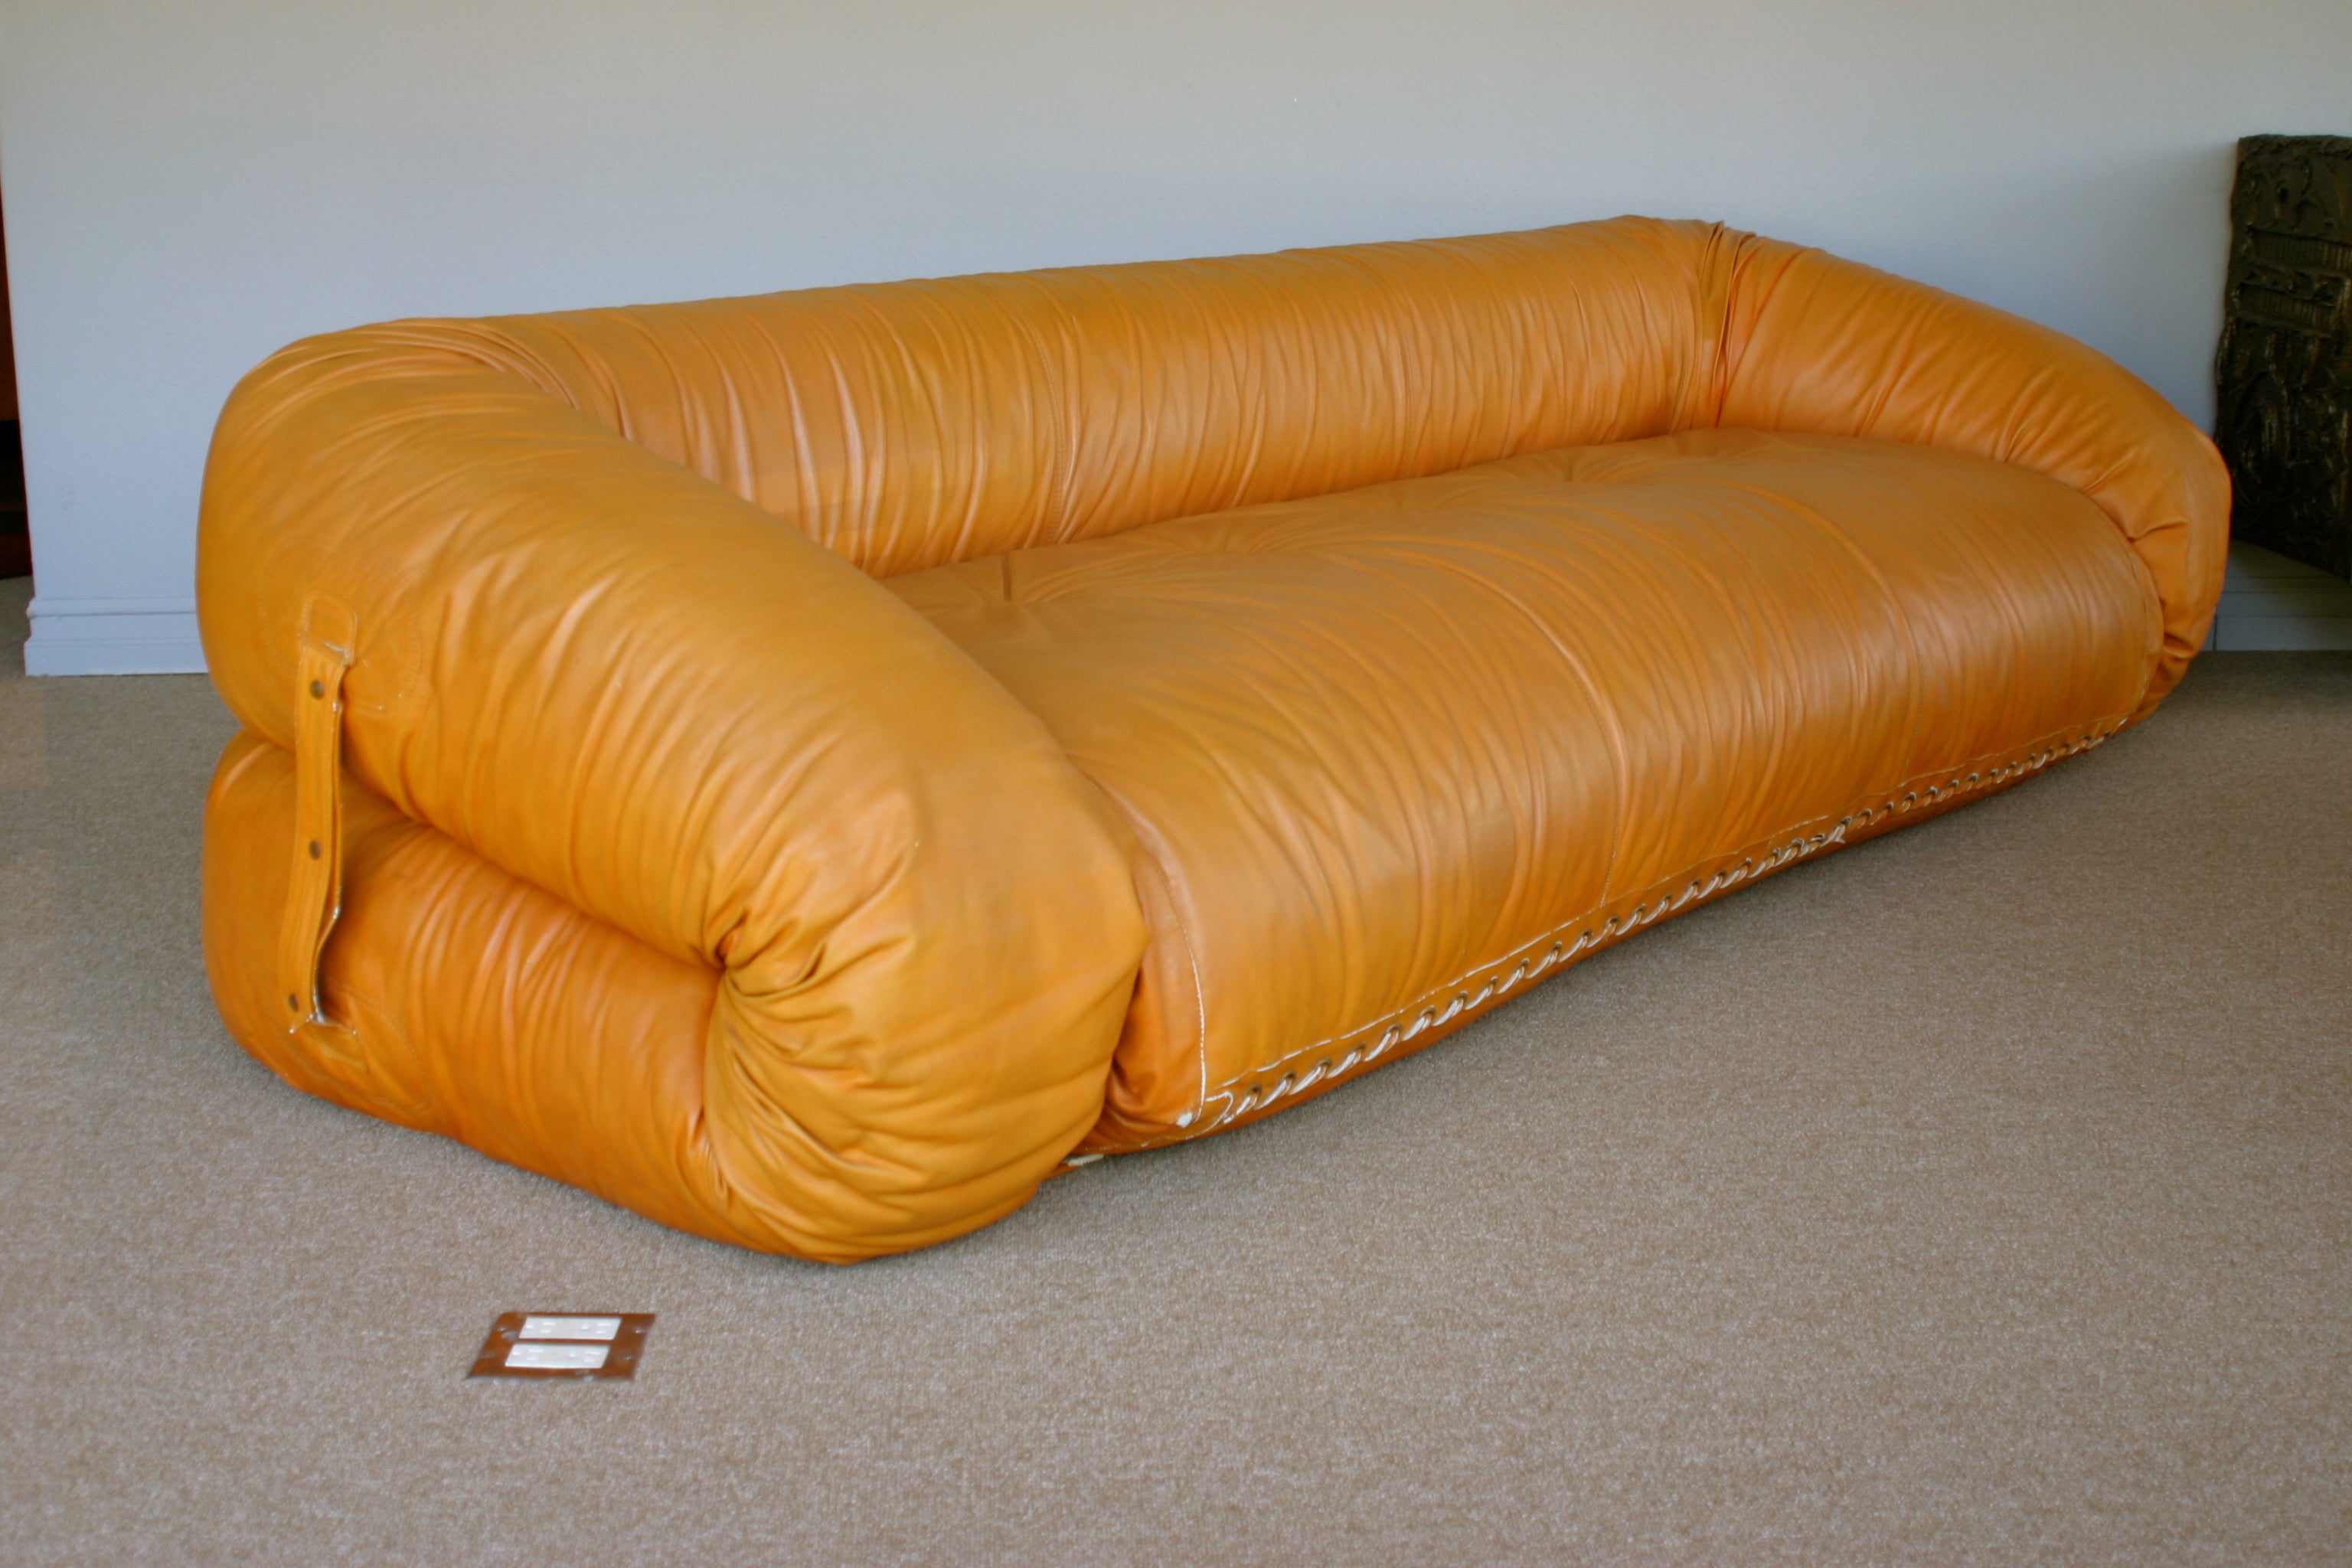 Anfibio Leather Sofa Bed by Alessandro Becchi for Giovannetti